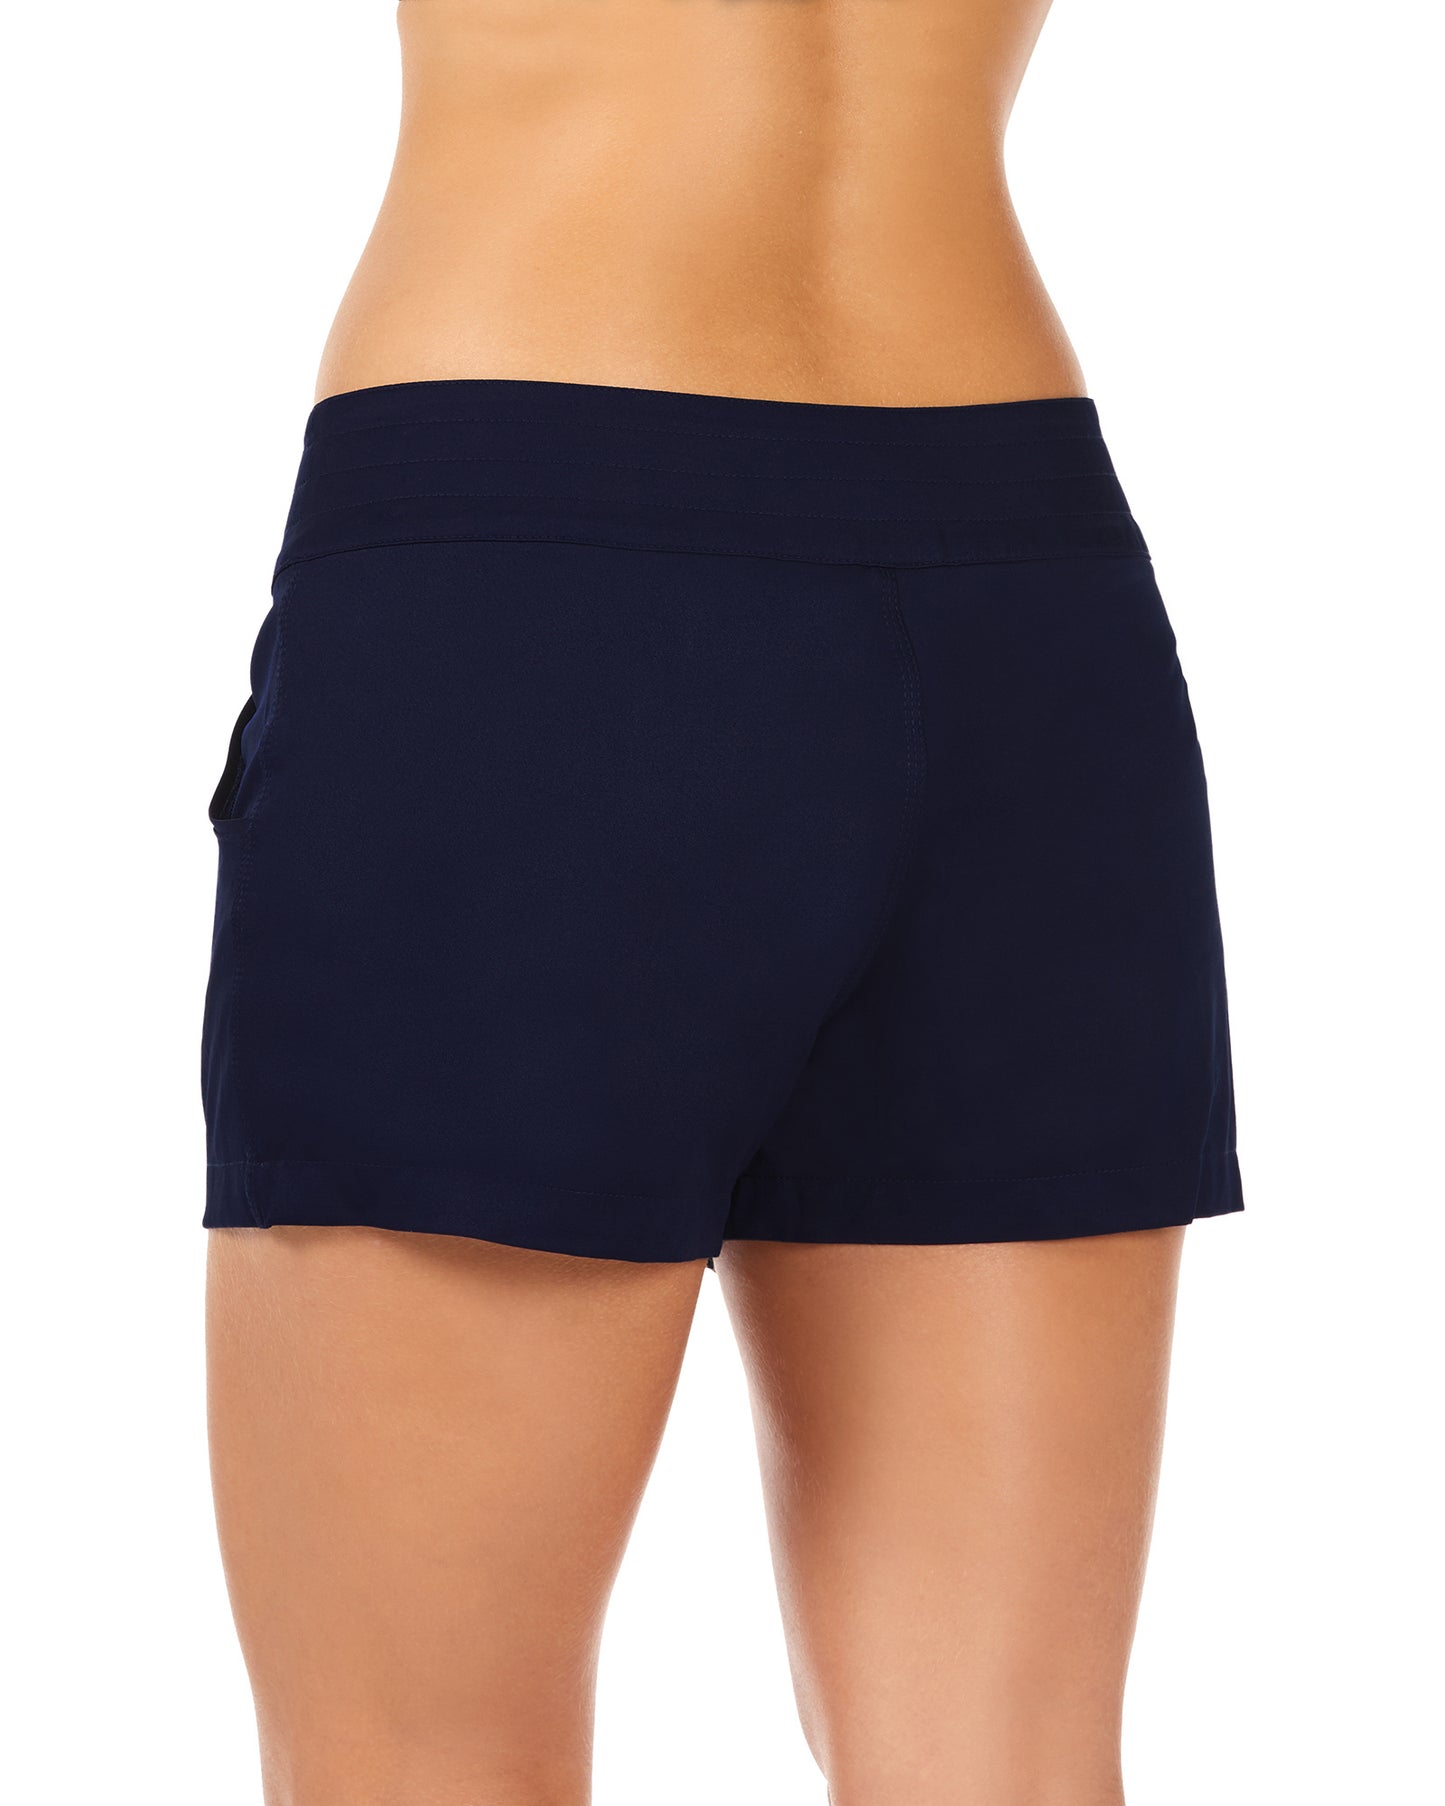 IN'VOLAND Plus Size Swim Shorts for Women Stretchy Ruched Swimsuit Bottoms  Tie Side Swimwear Board Shorts 16W - 28W Navy Blue : :  Clothing, Shoes & Accessories